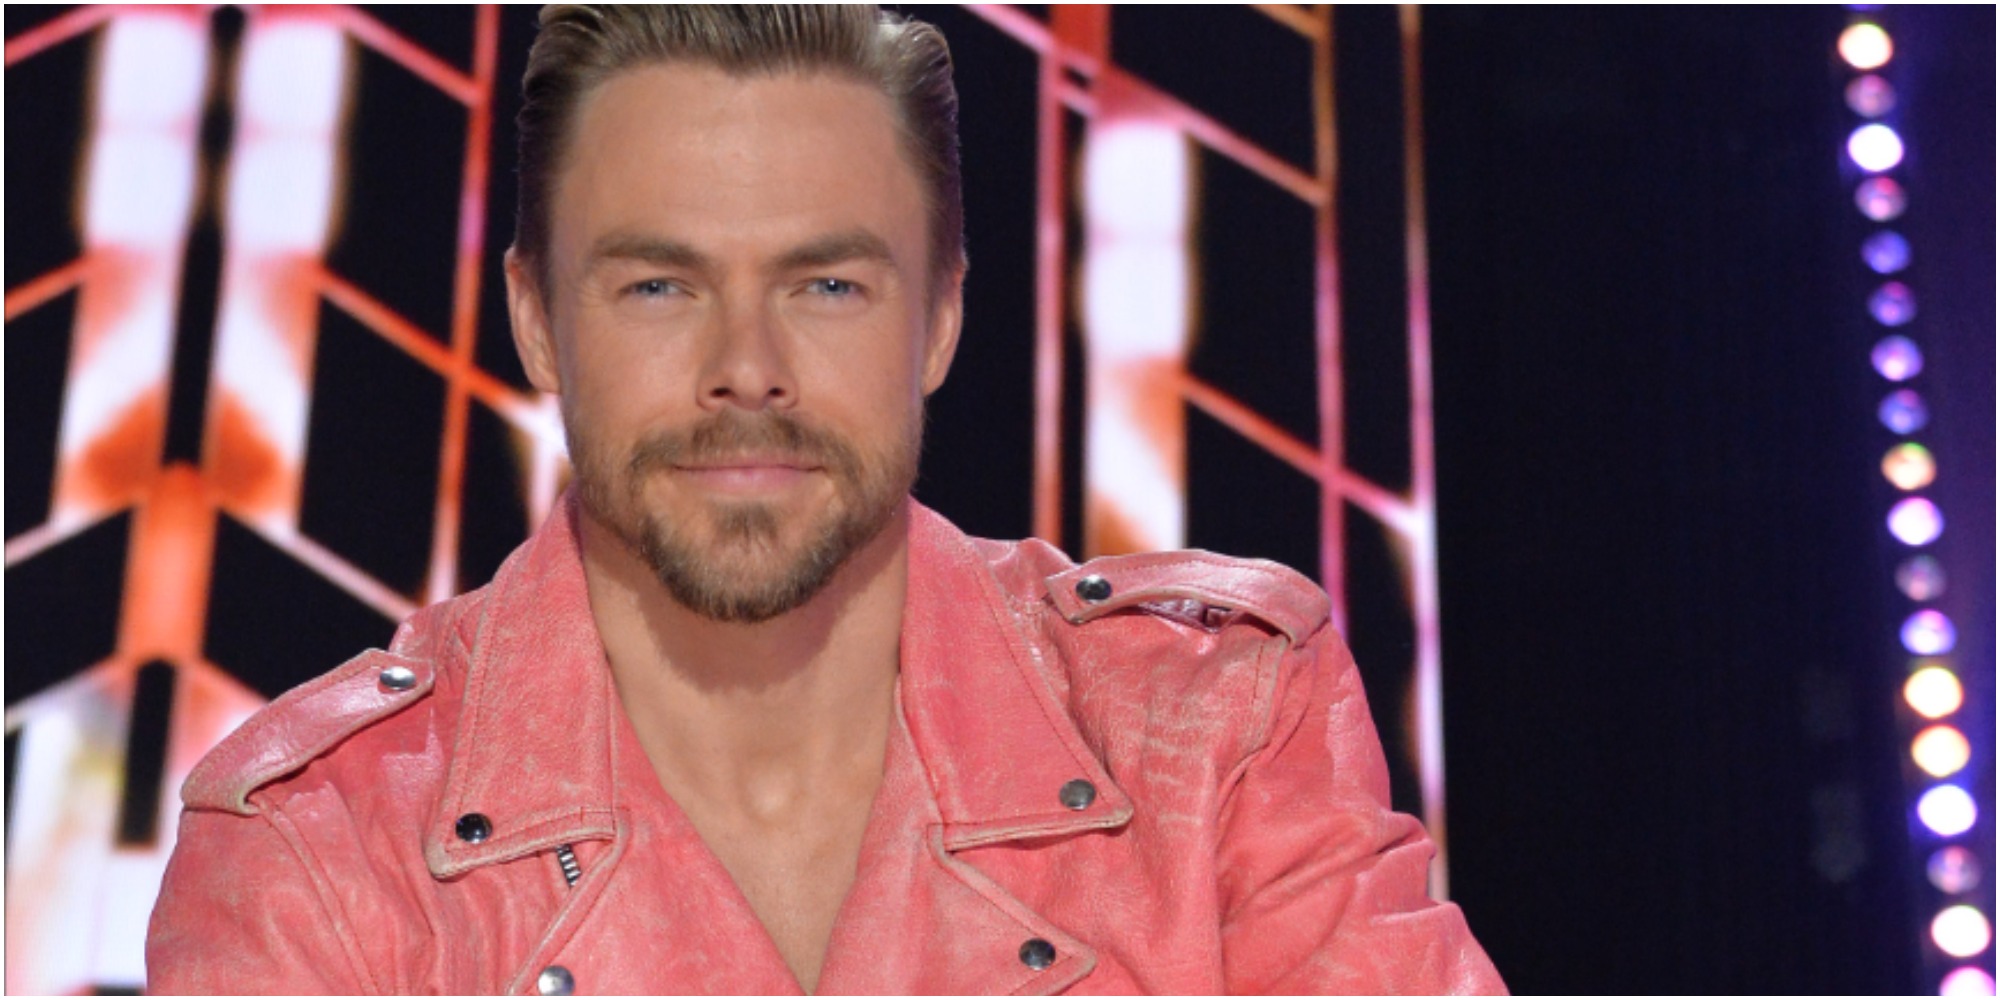 Derek Hough wears a pink jacket on "dancing with the stars" queen night.